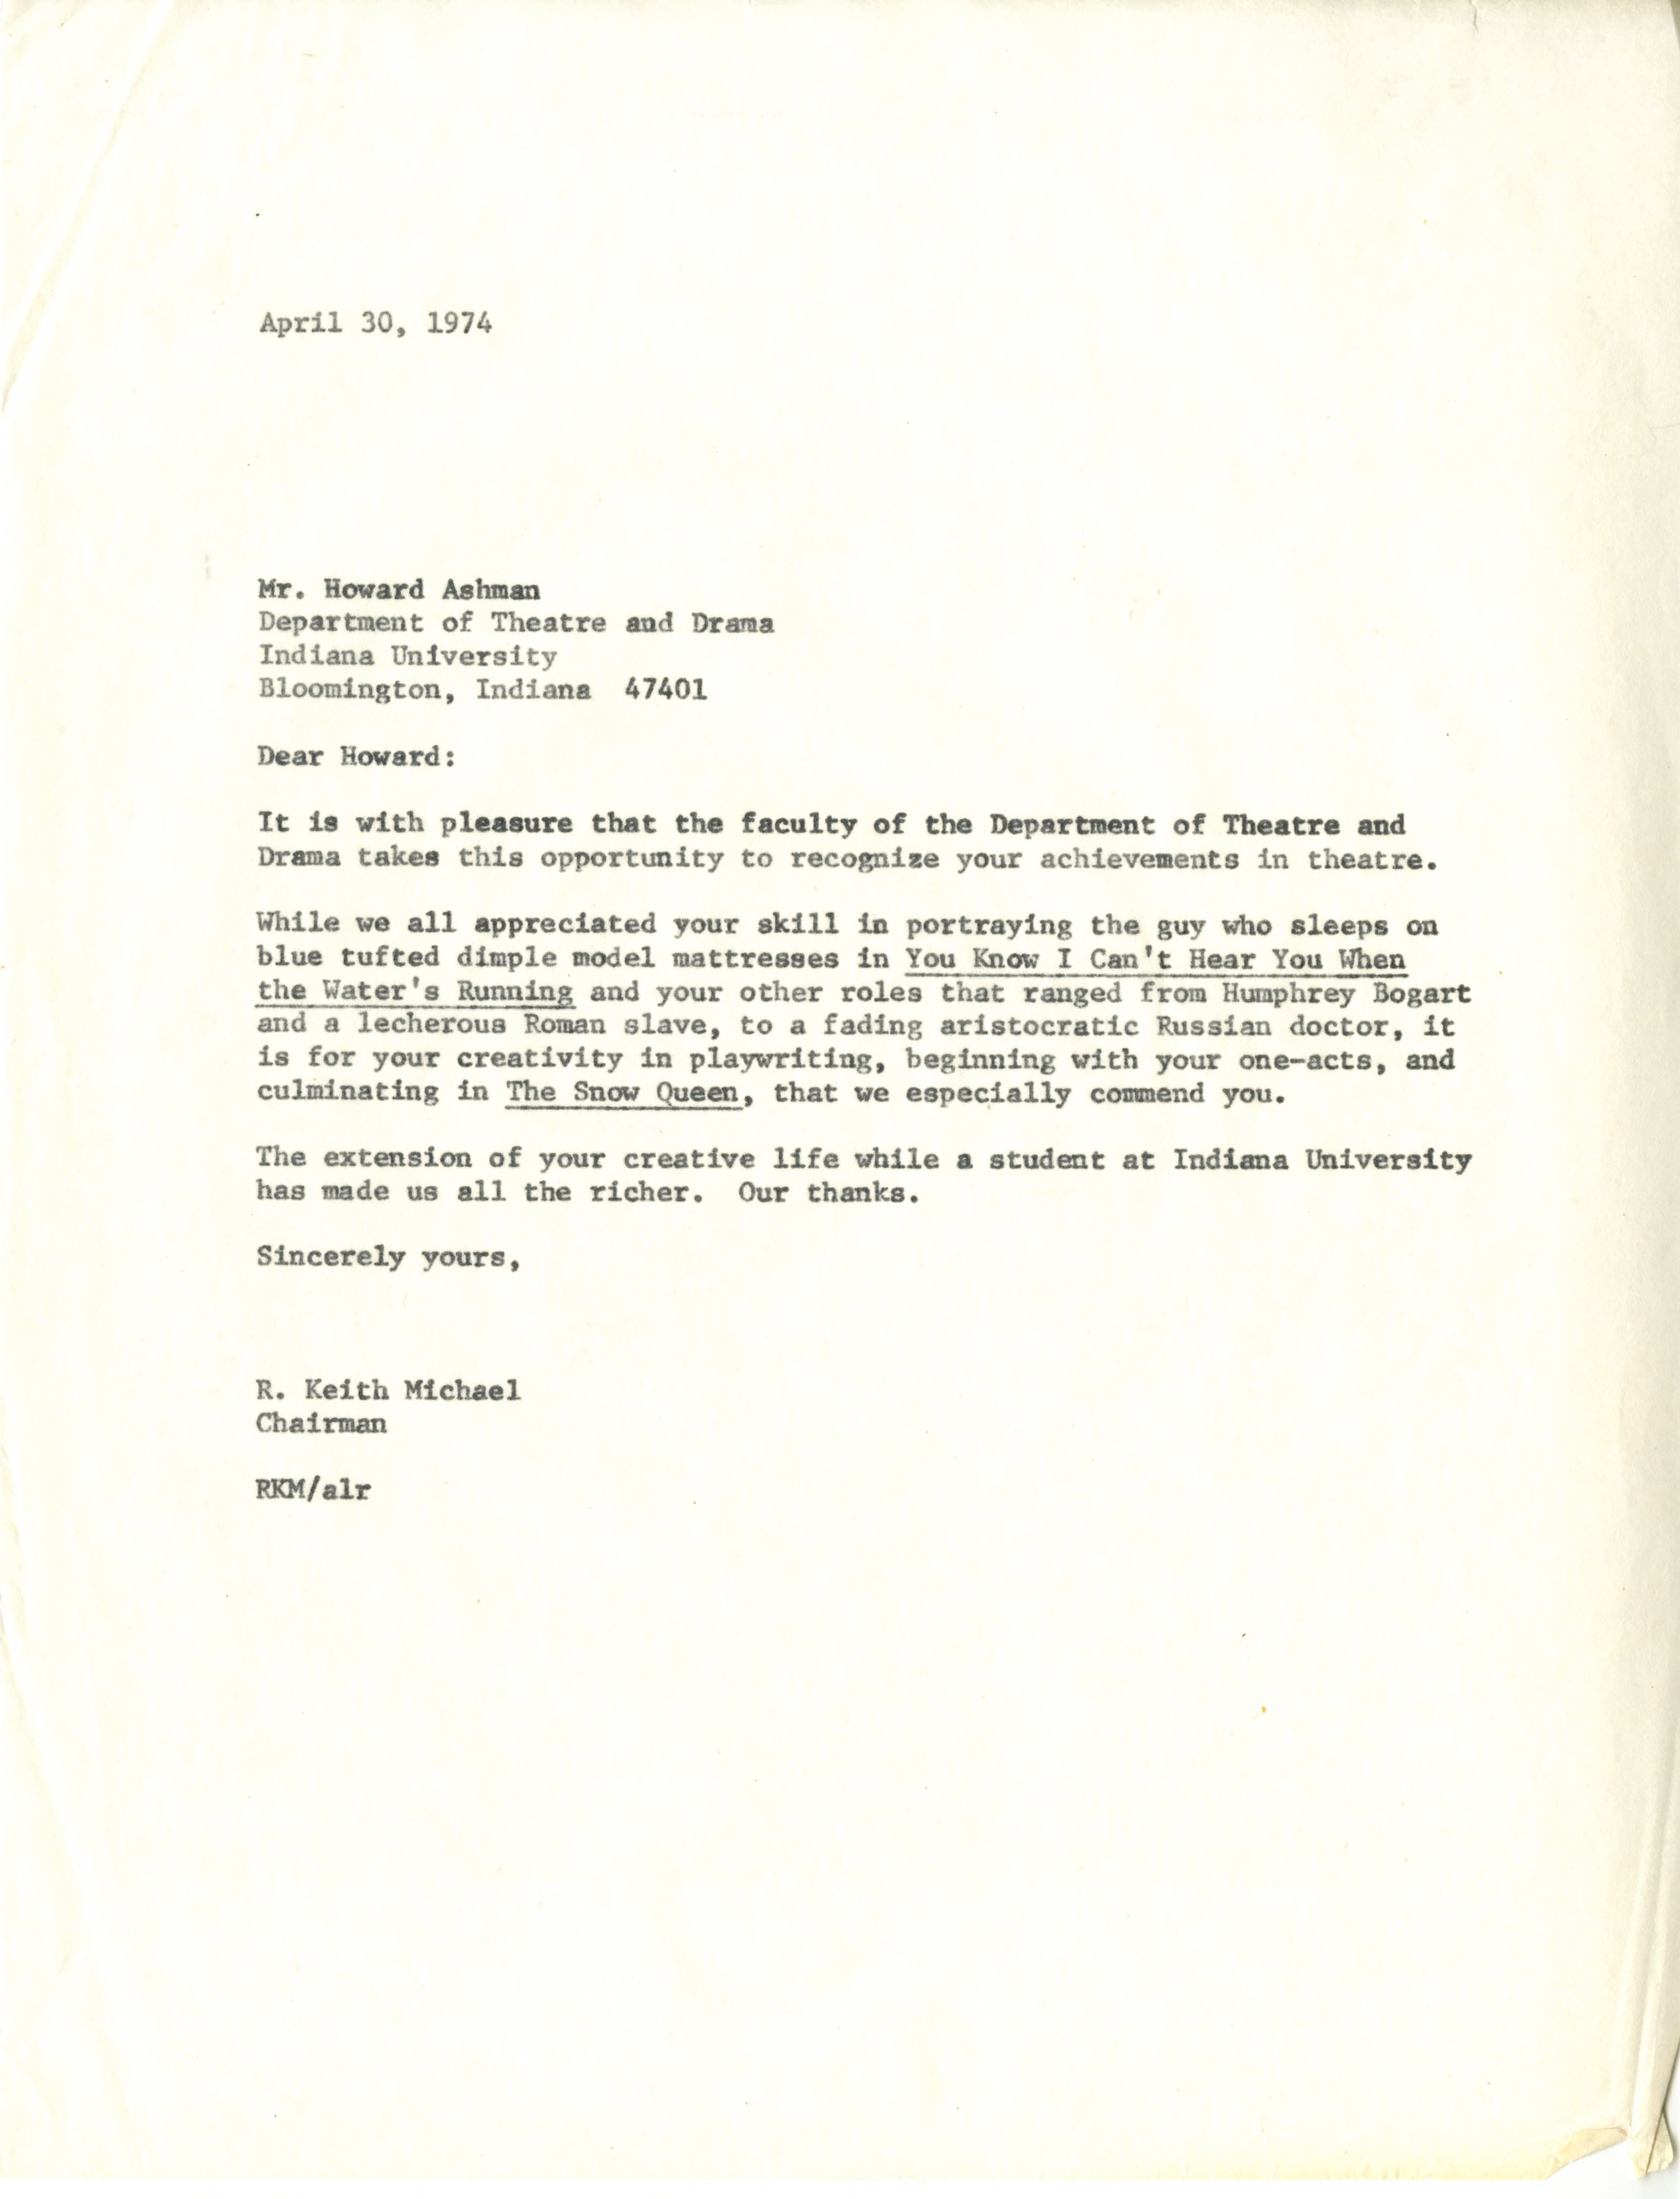 Scanned image of a typed letter.